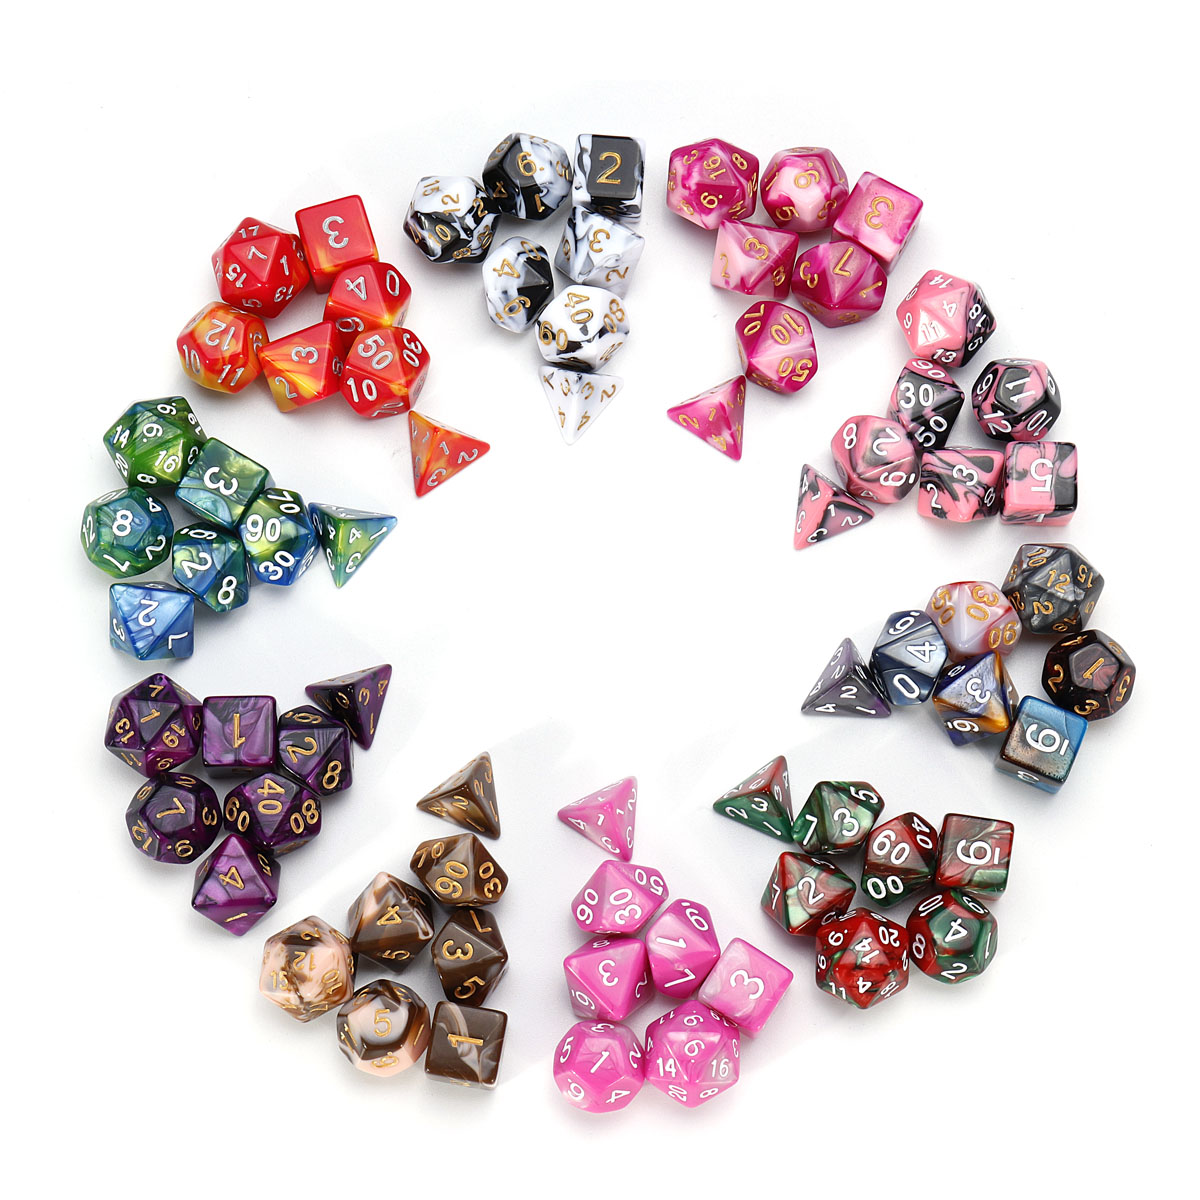 7Pcs-Polyhedral-Dices-Double-Color-For-Role-Playing-Game-Dice-Set-With-Storage-Bag-1422309-1